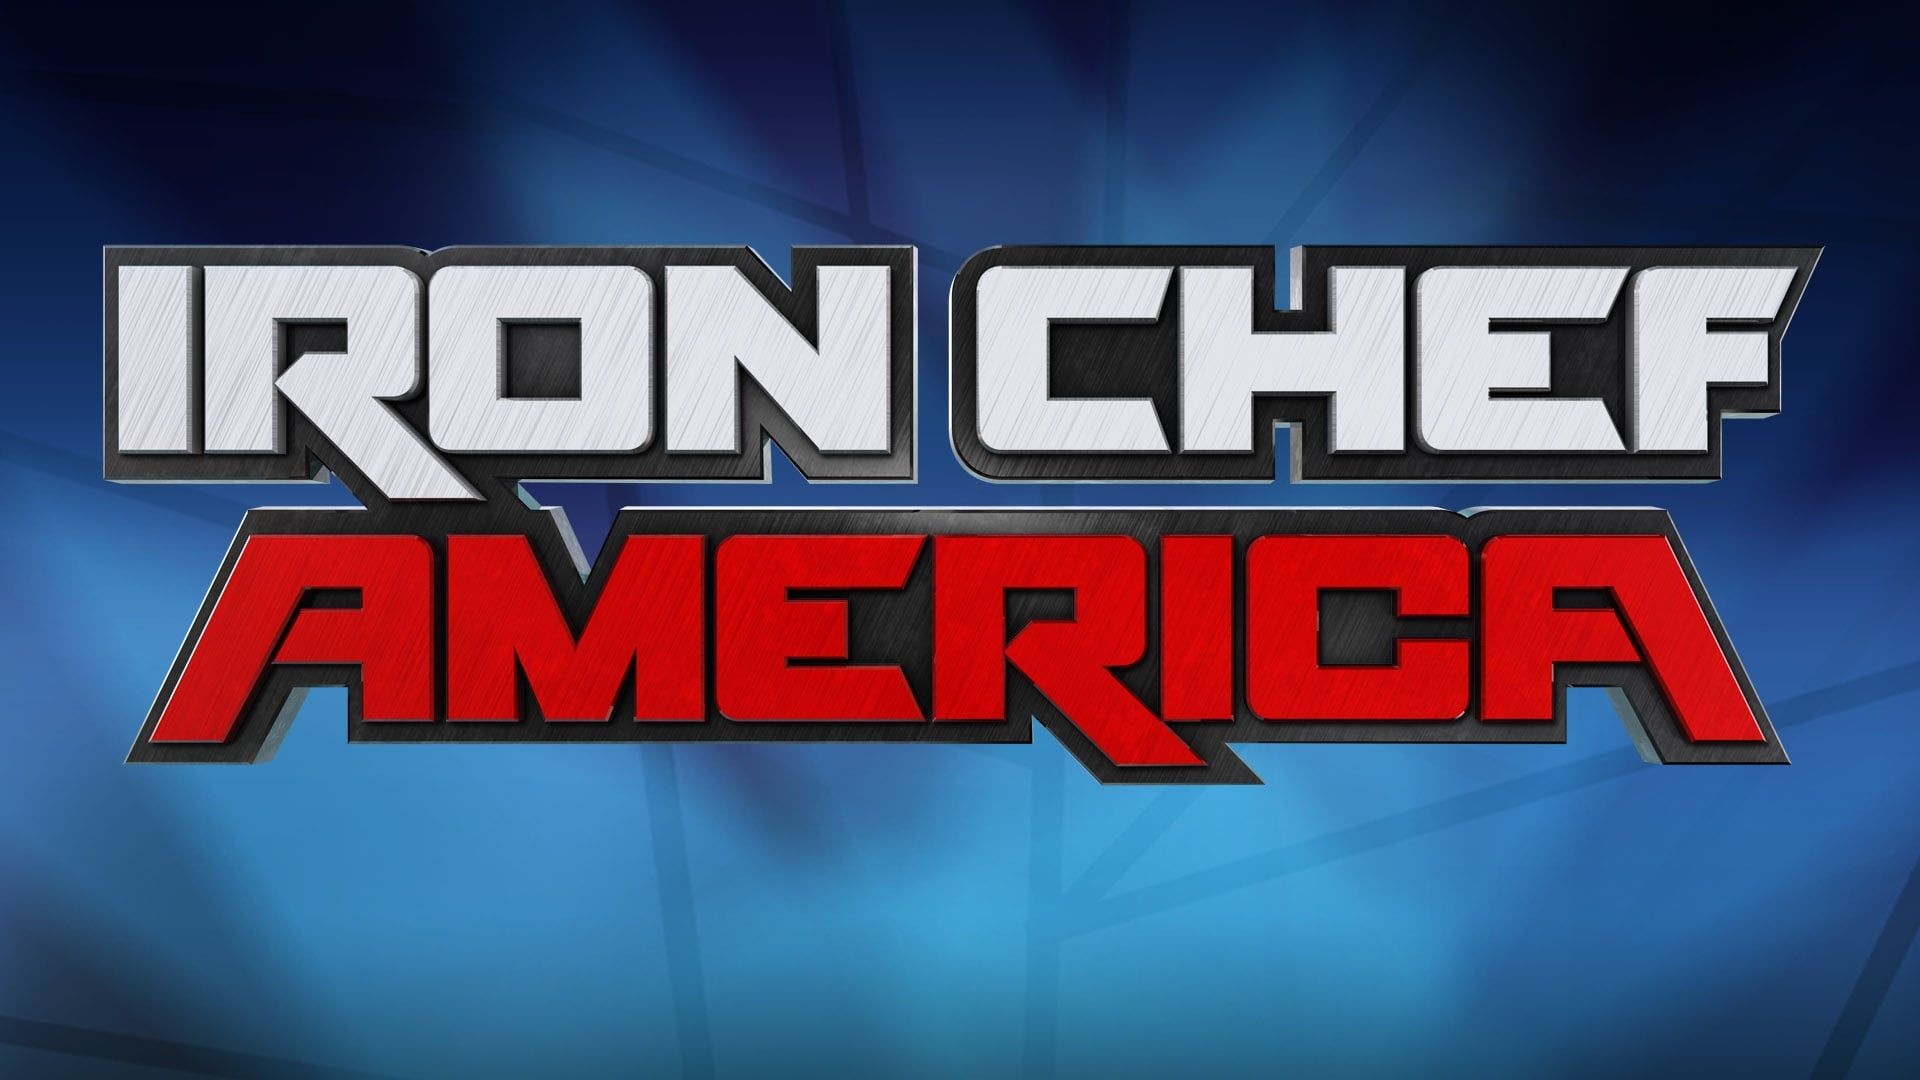 Iron Chef America: The Series background